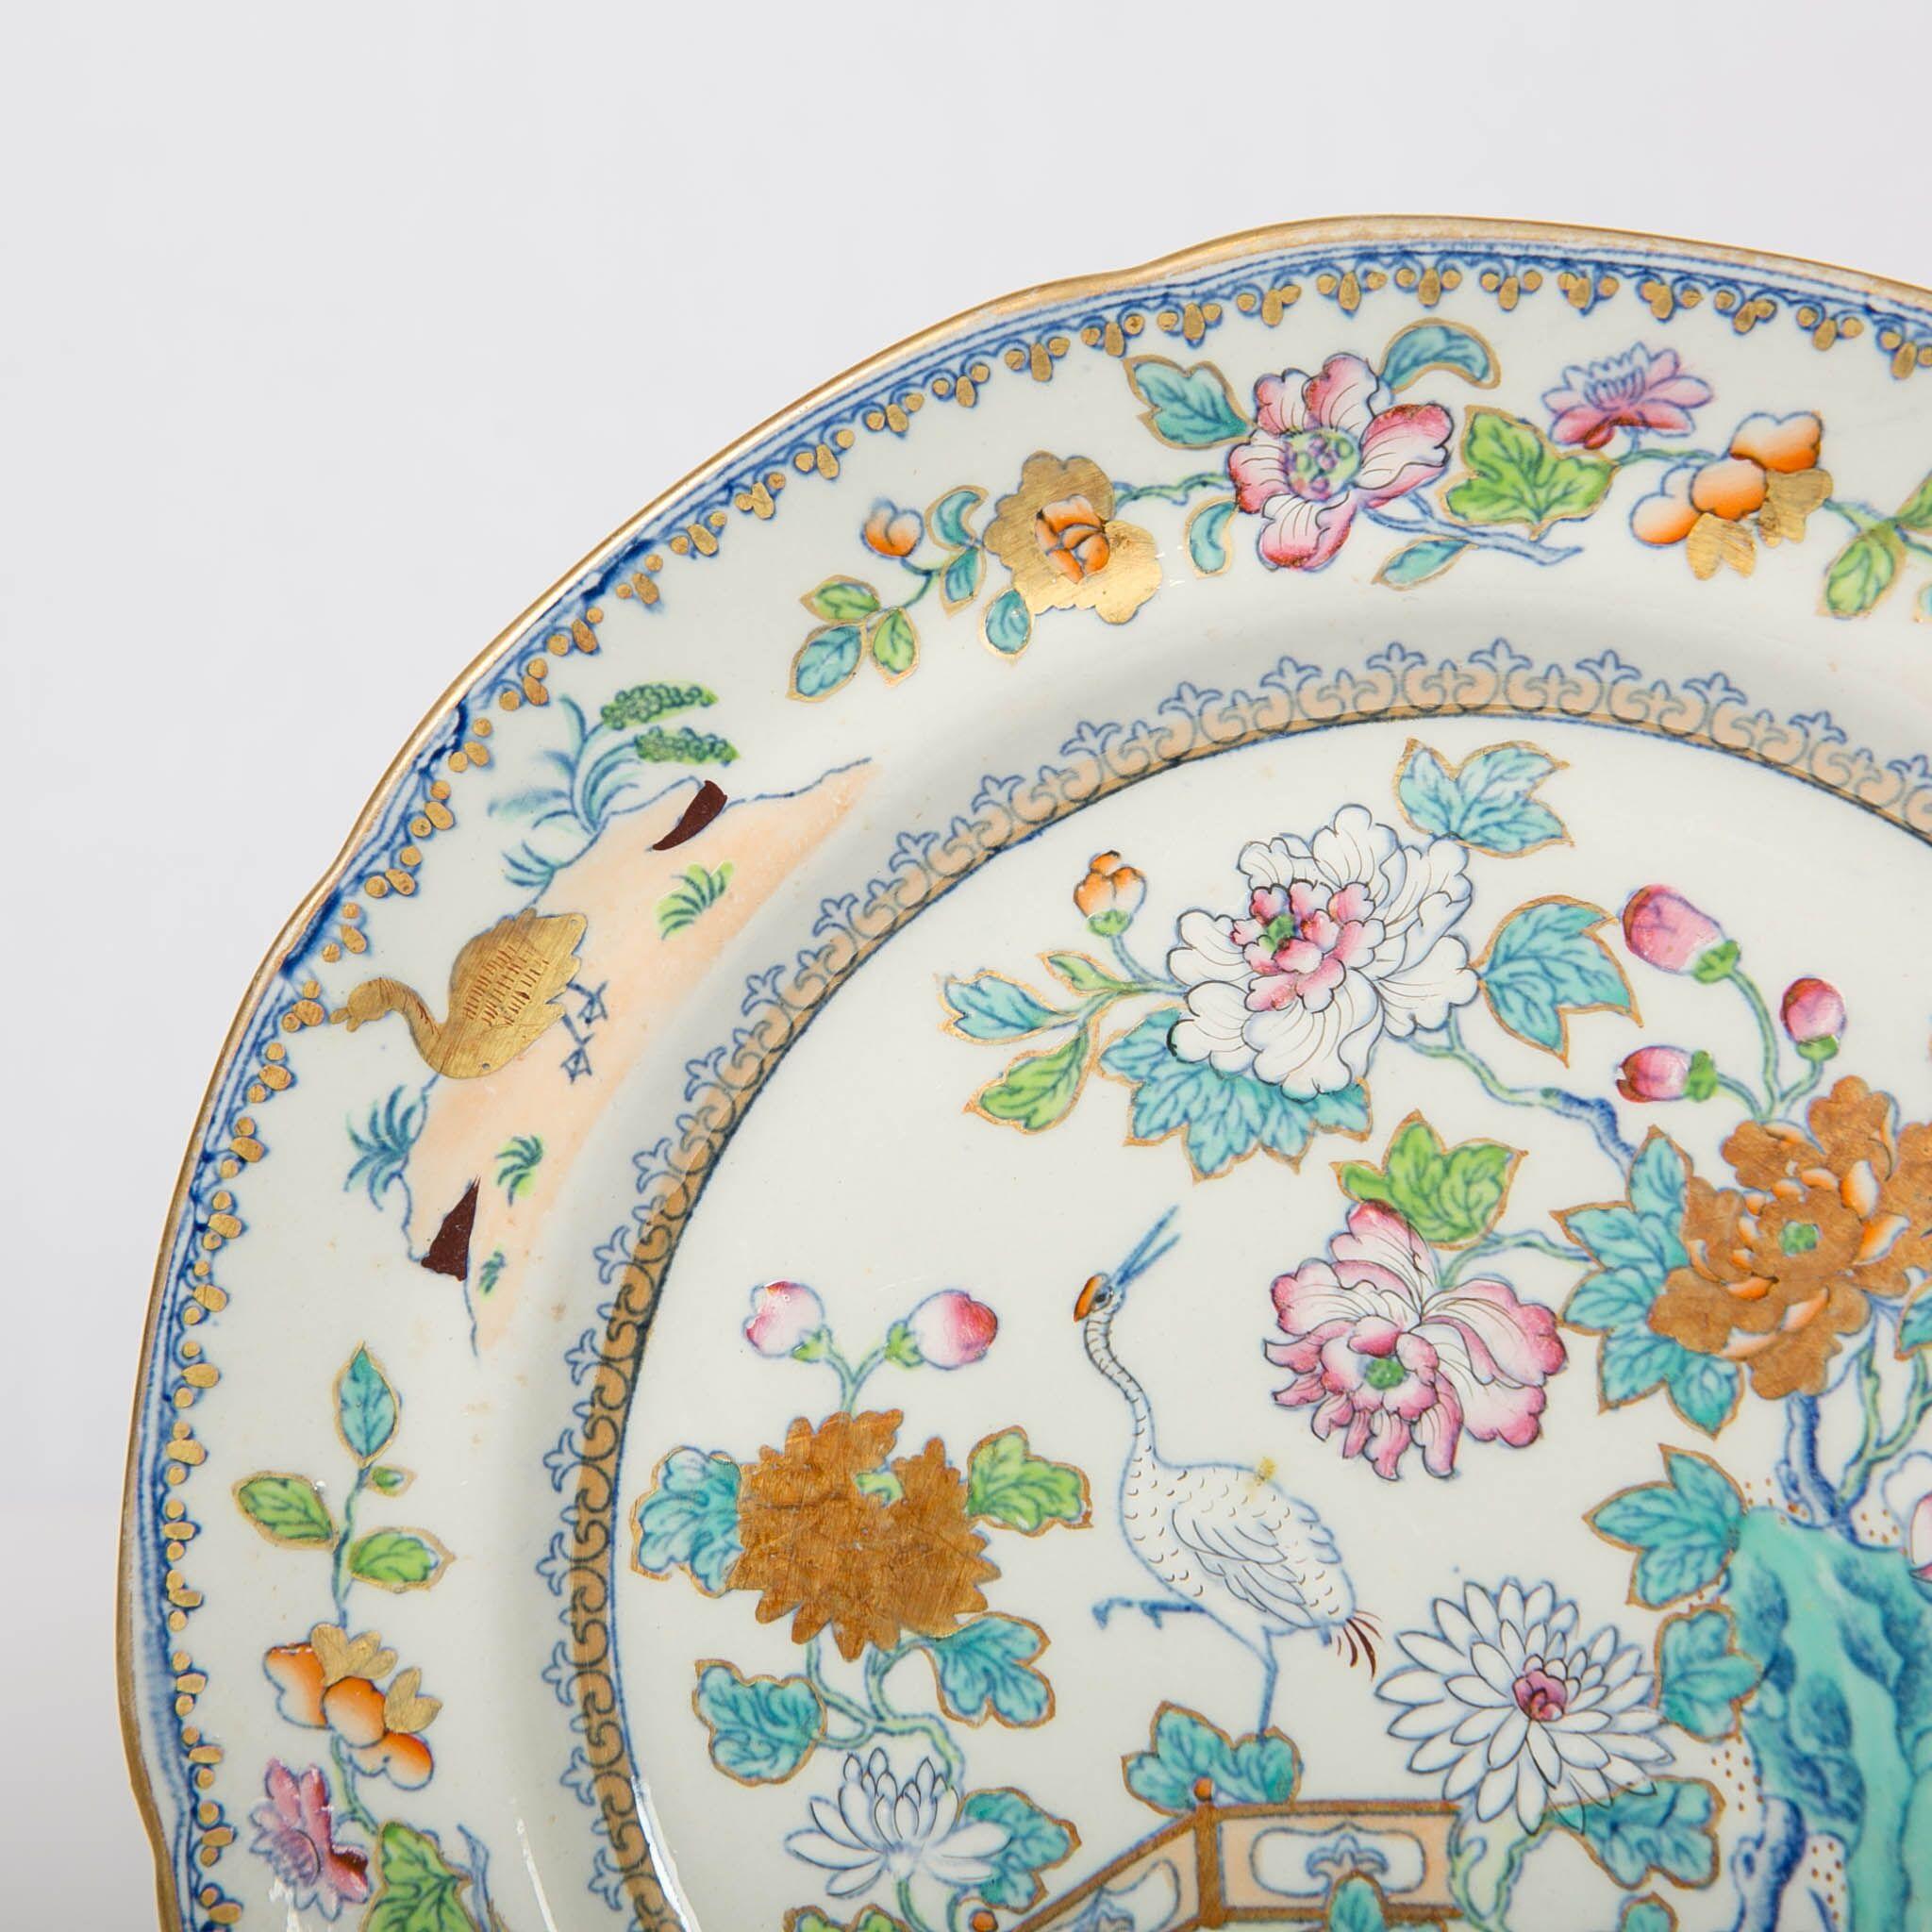 Pair of Davenport Plates with a Chinoiserie Design Turquoise and Pink (Eisenstein)